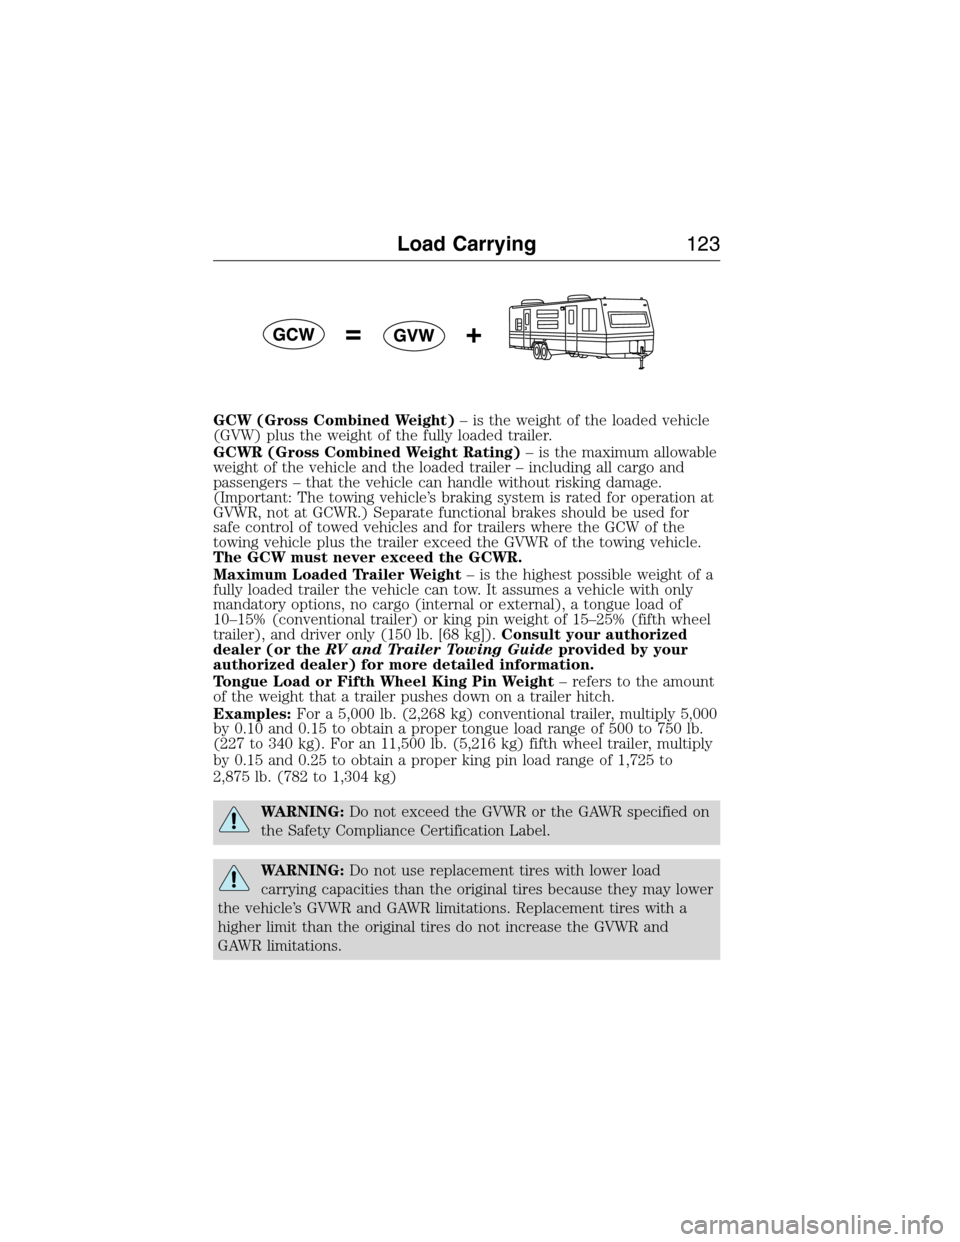 FORD E SERIES 2015 4.G Owners Manual GCW (Gross Combined Weight)– is the weight of the loaded vehicle
(GVW) plus the weight of the fully loaded trailer.
GCWR (Gross Combined Weight Rating)– is the maximum allowable
weight of the vehi